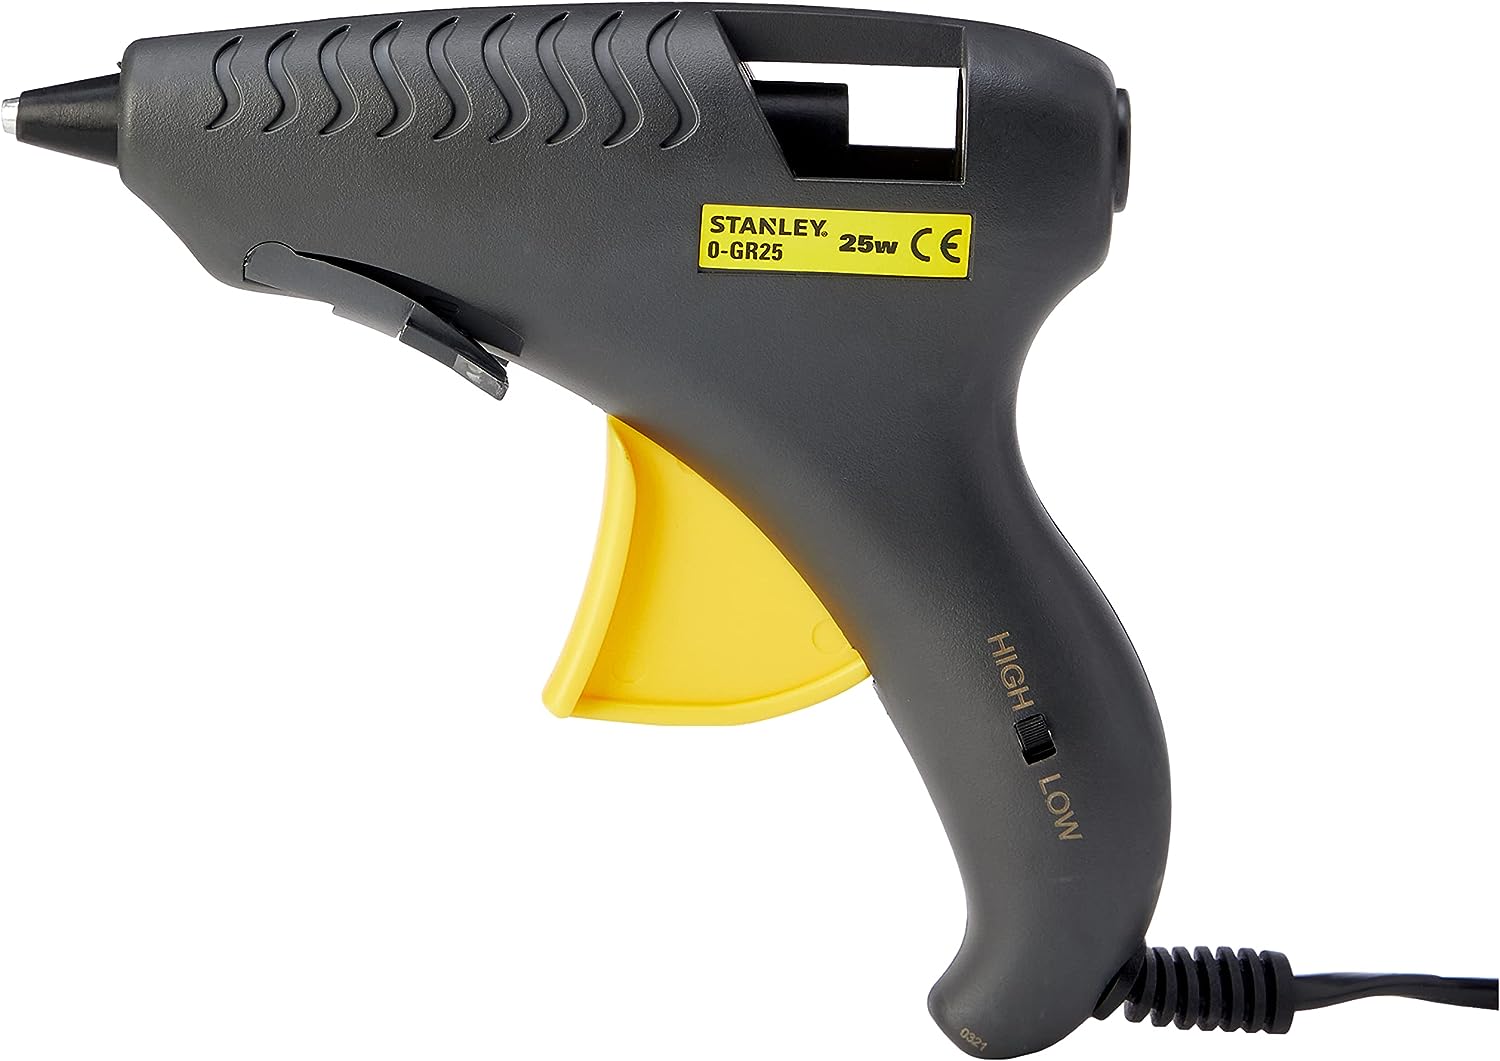 15 Types of Glue Guns With Characteristics and Usage